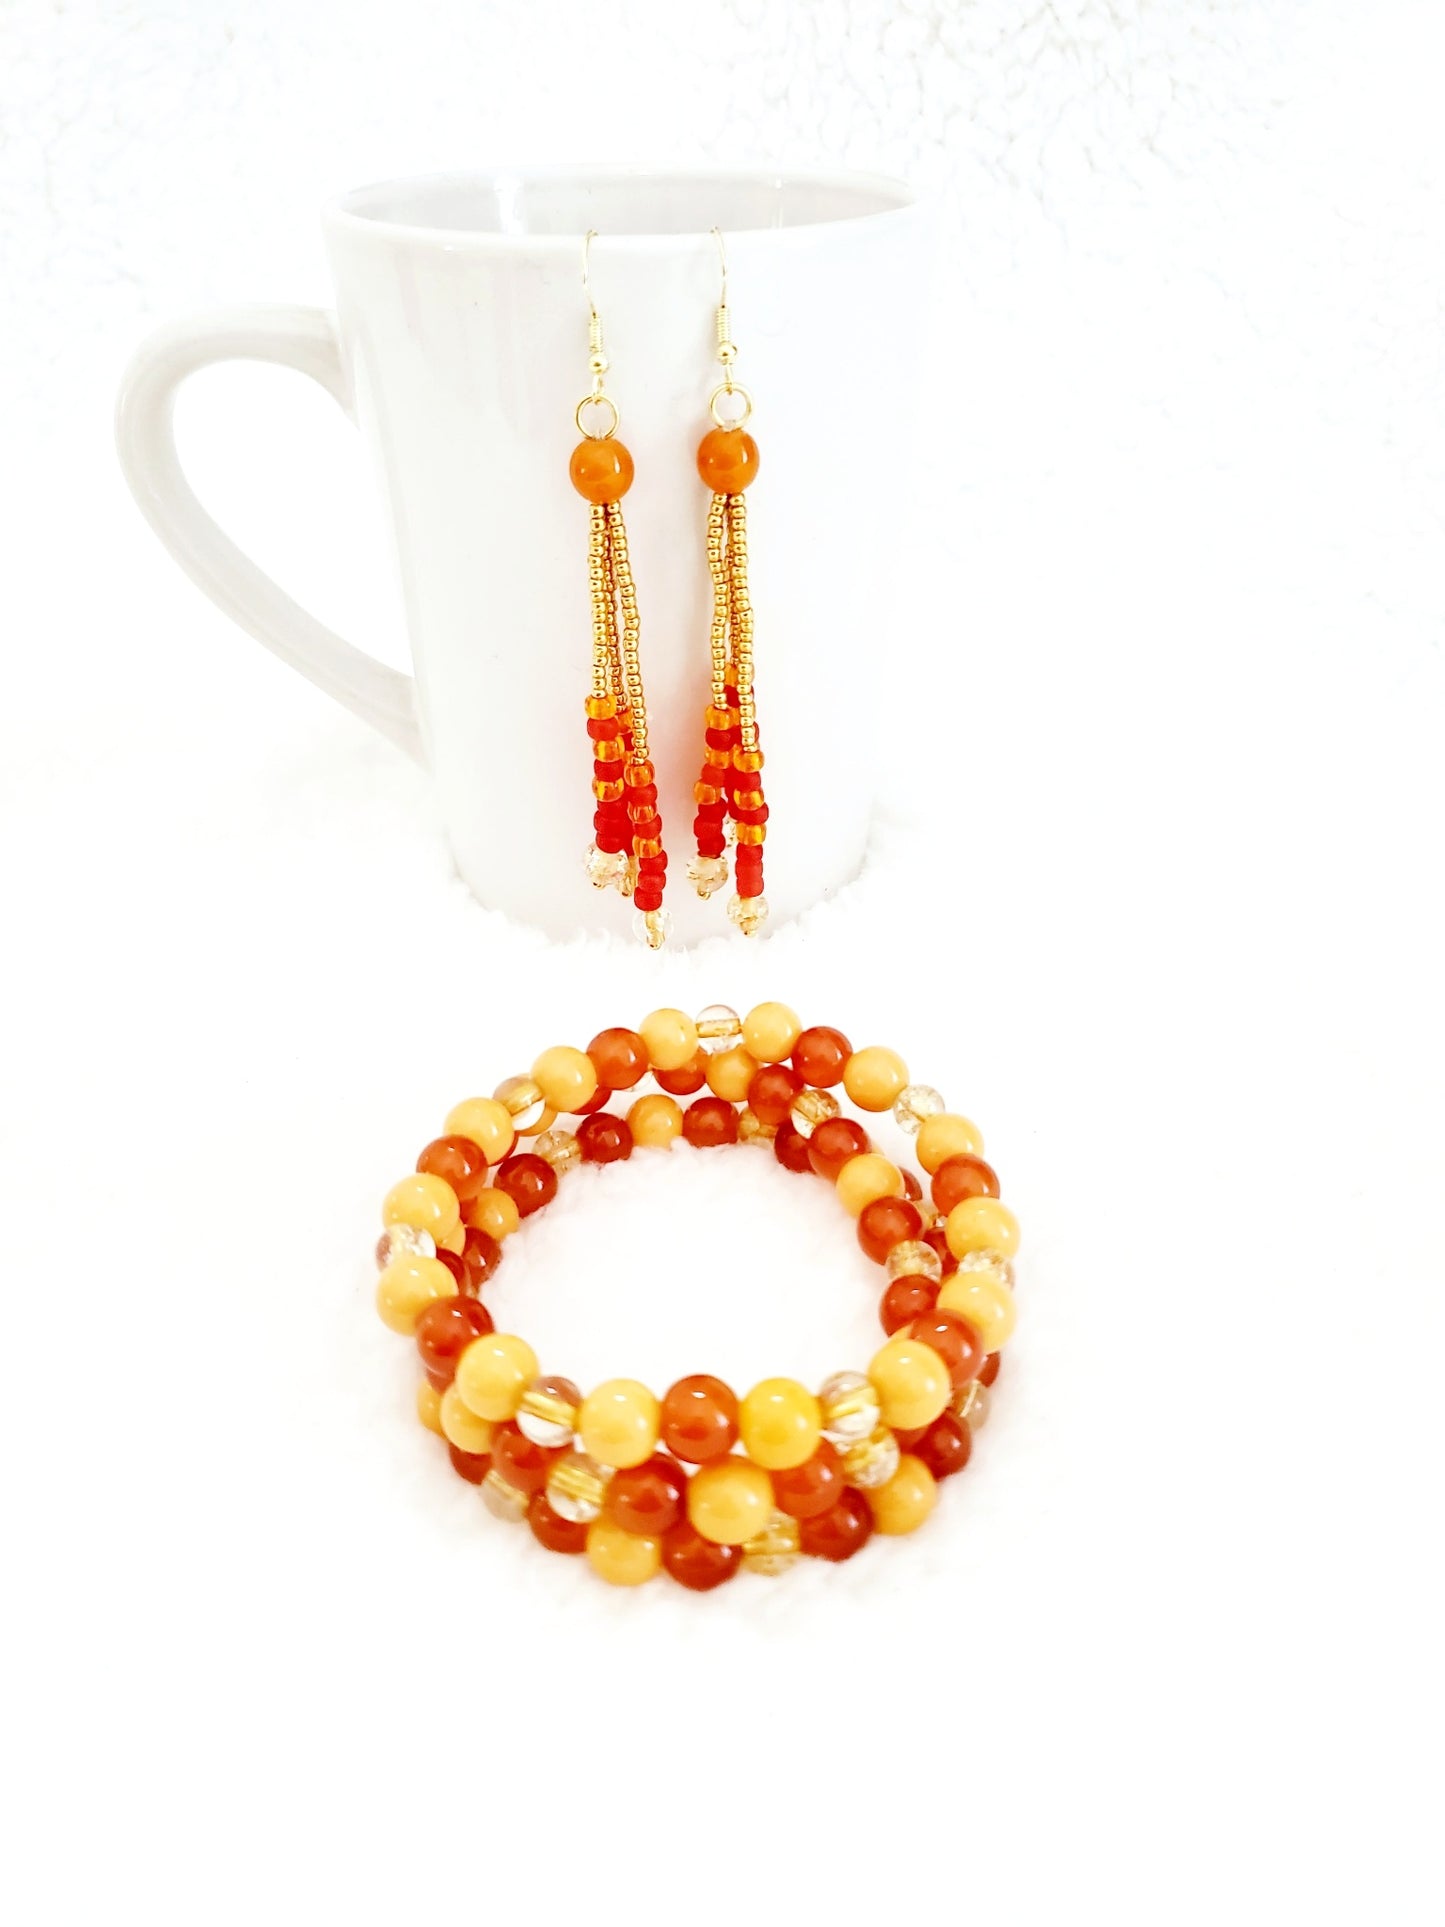 Autumn Sunset Tassel Earrings designed by creator Unique Carper – Chic tassel earrings in mesmerizing shades of red and orange that capture the essence of a captivating sunset. Shop I Am Unique